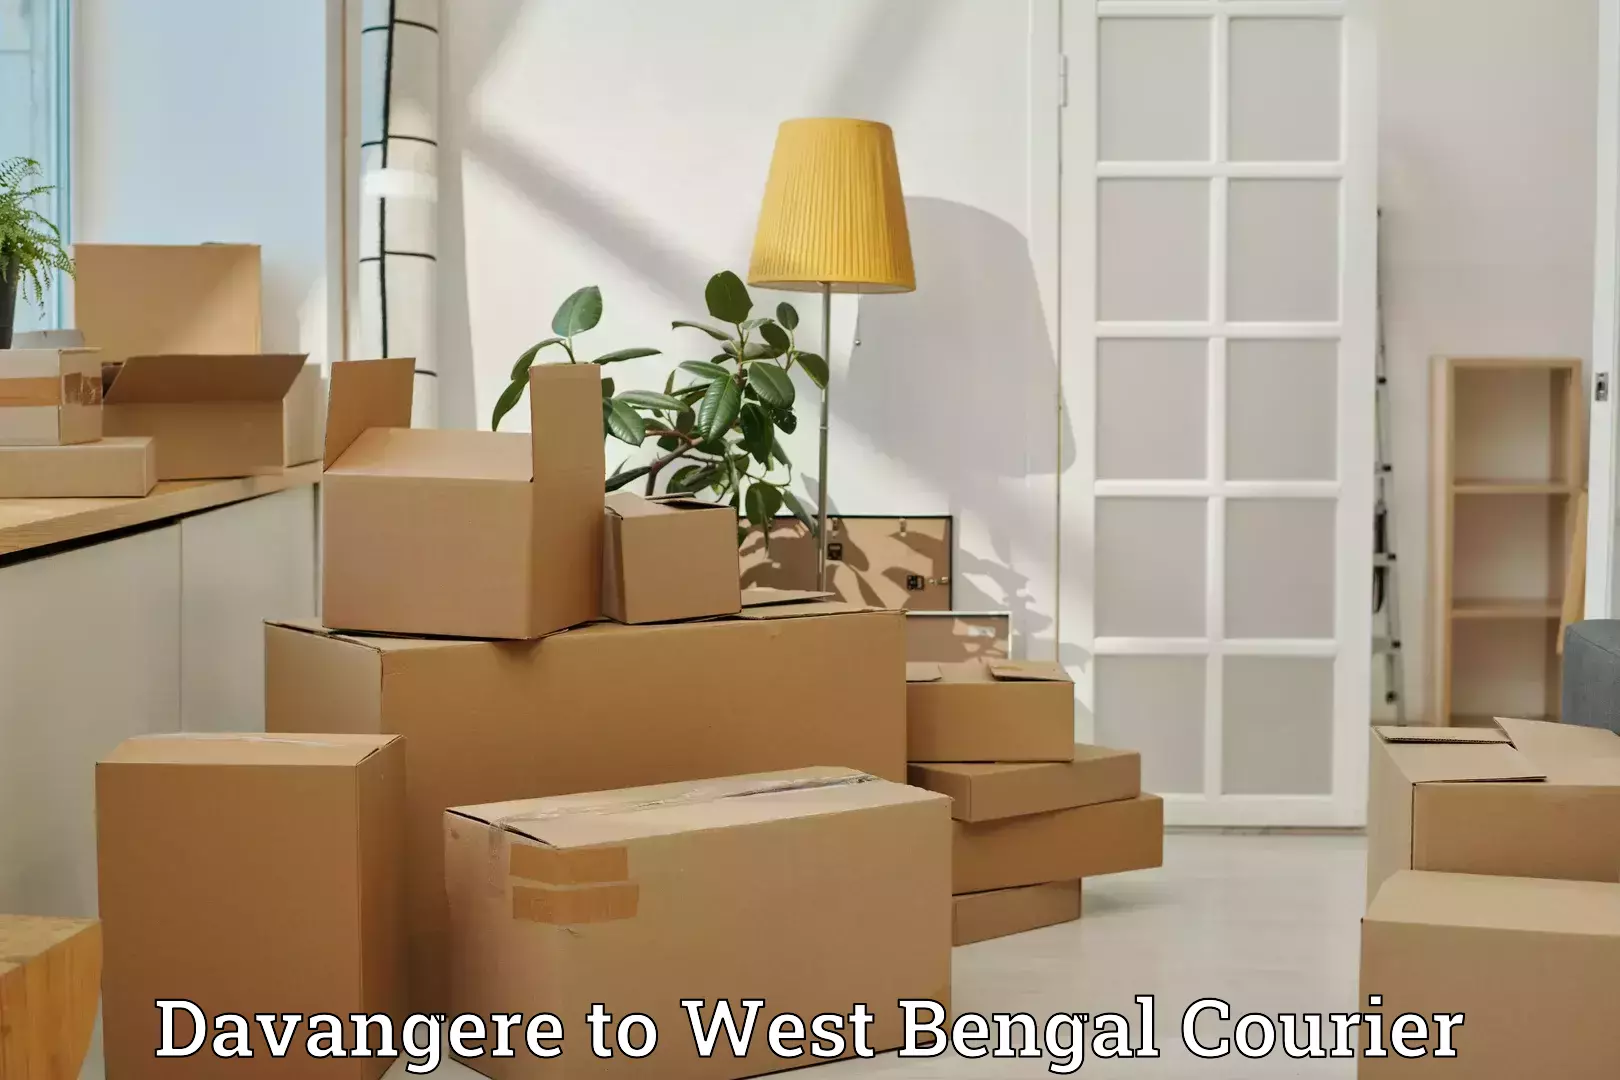 Luggage shipment specialists Davangere to West Bengal